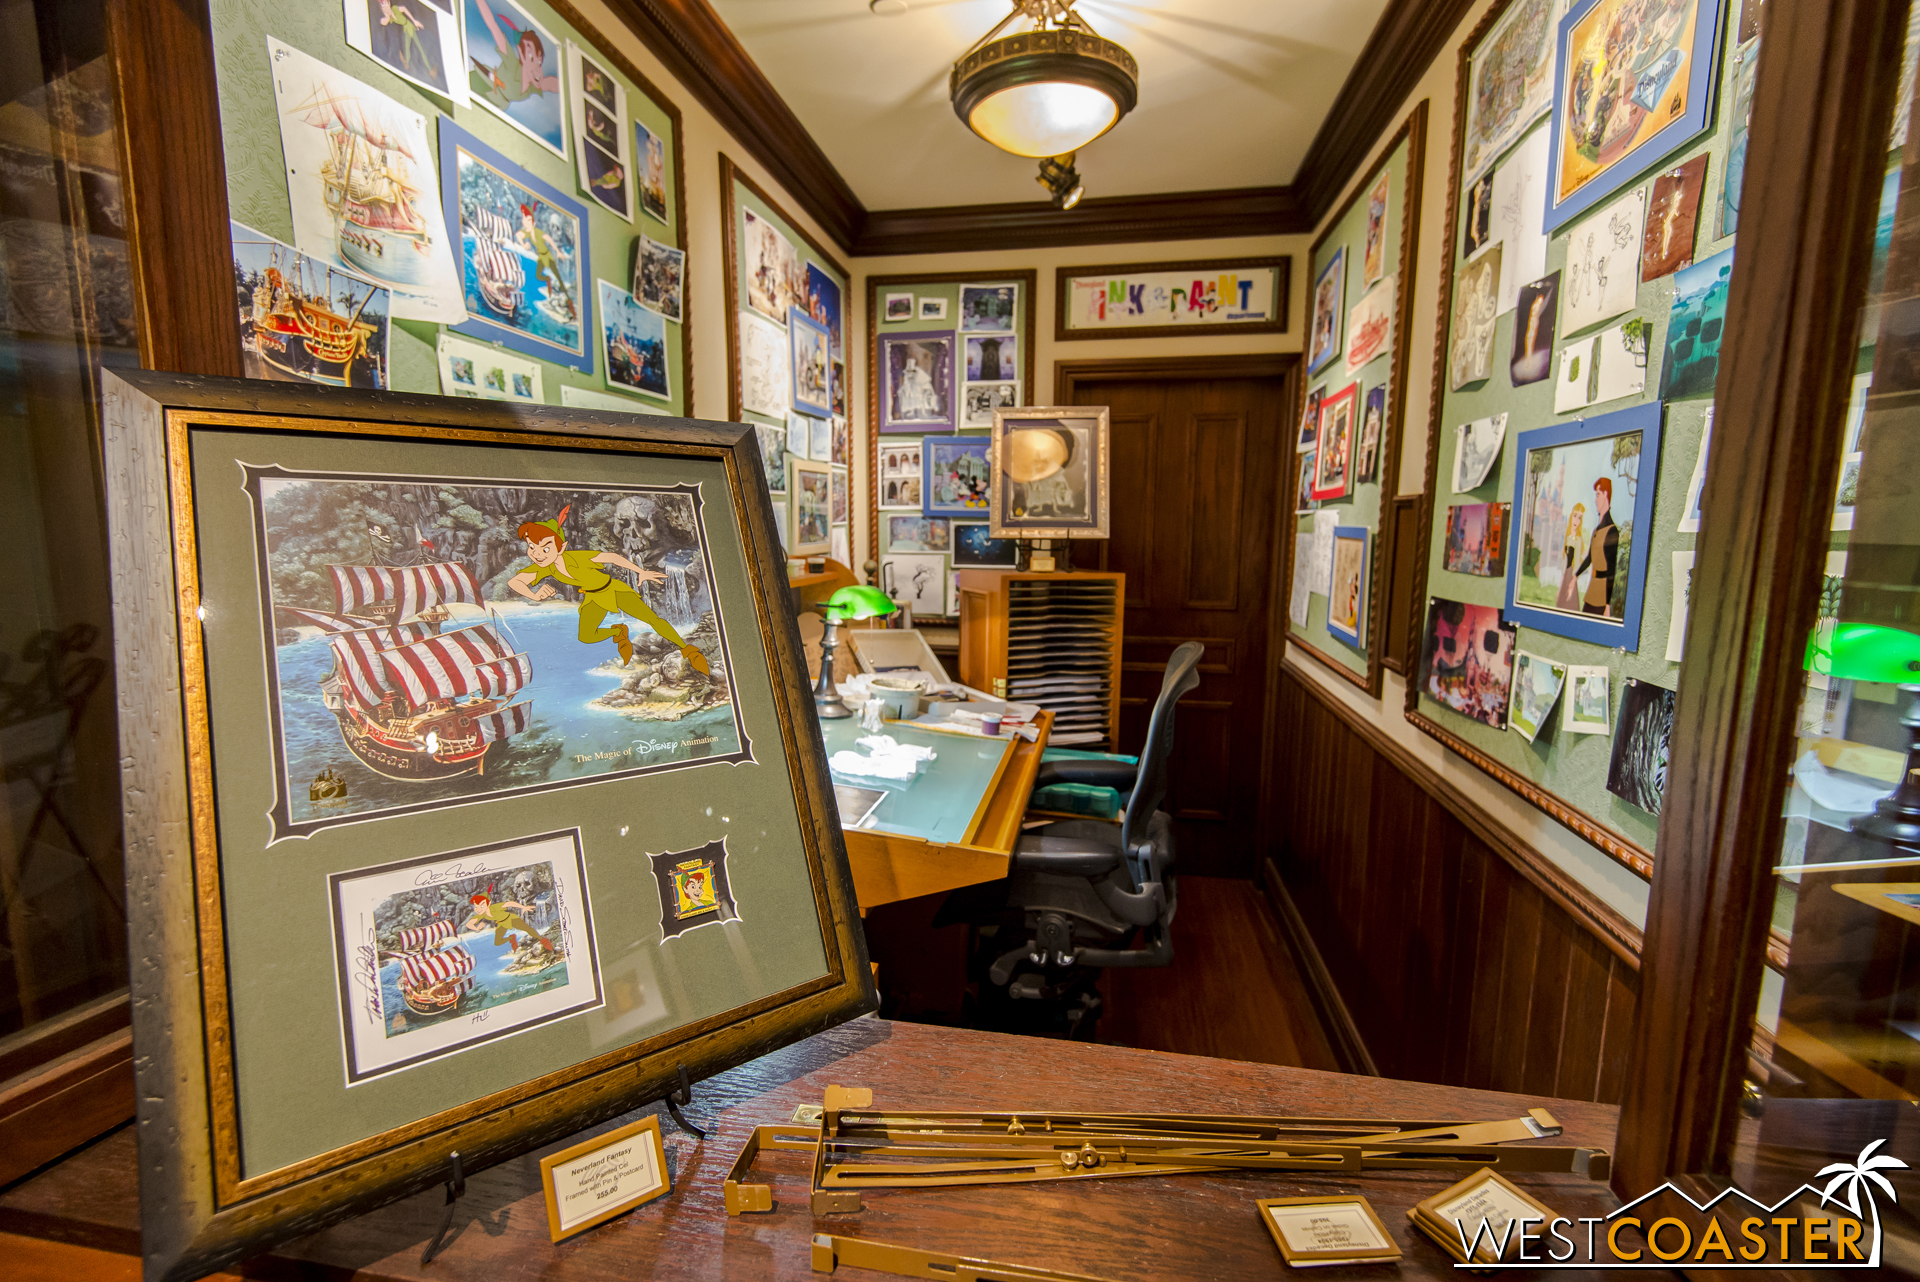  The Disney Gallery drawing studio has also been updated with Peter Pan content. 